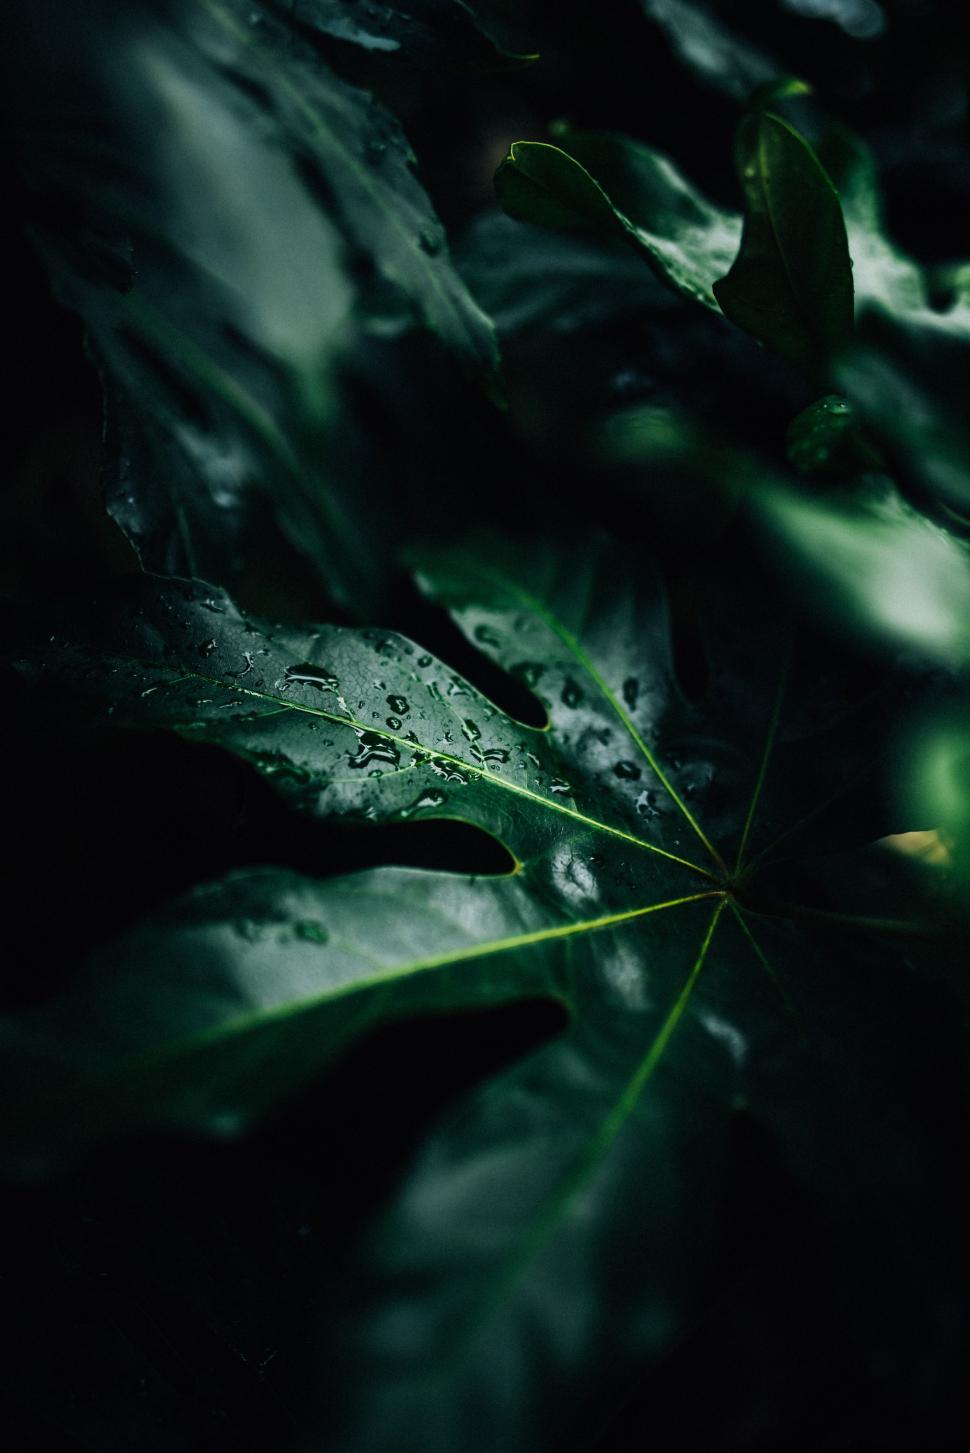 Free Image of Fresh Green Leaf Covered in Water Droplets 